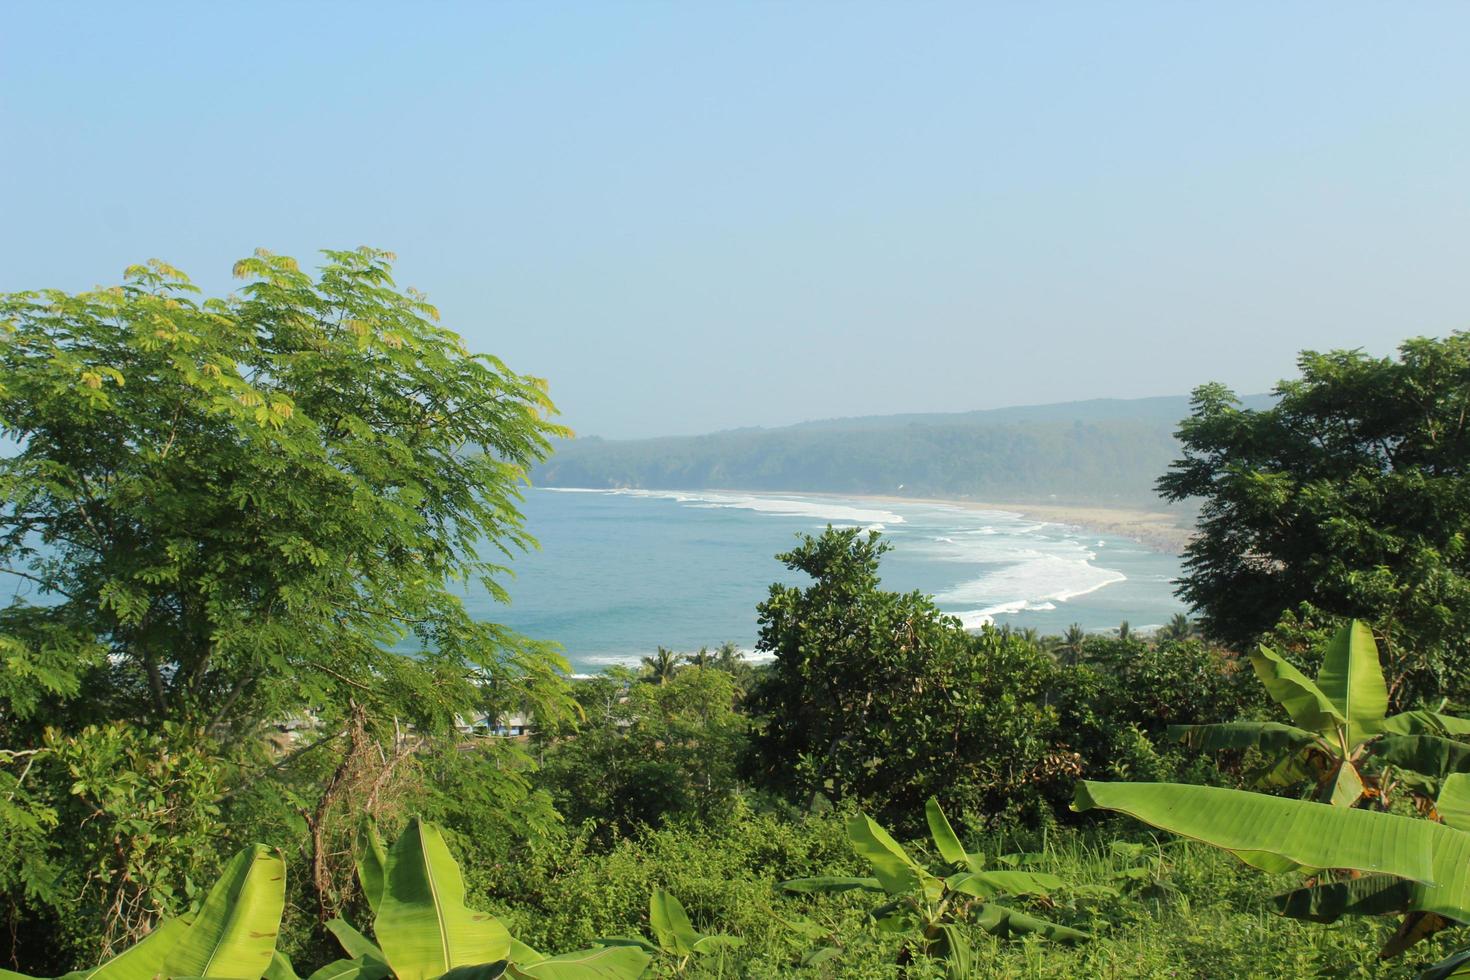 Picture of Sawarna beach from the top of the mountain, Banten, Indonesia photo